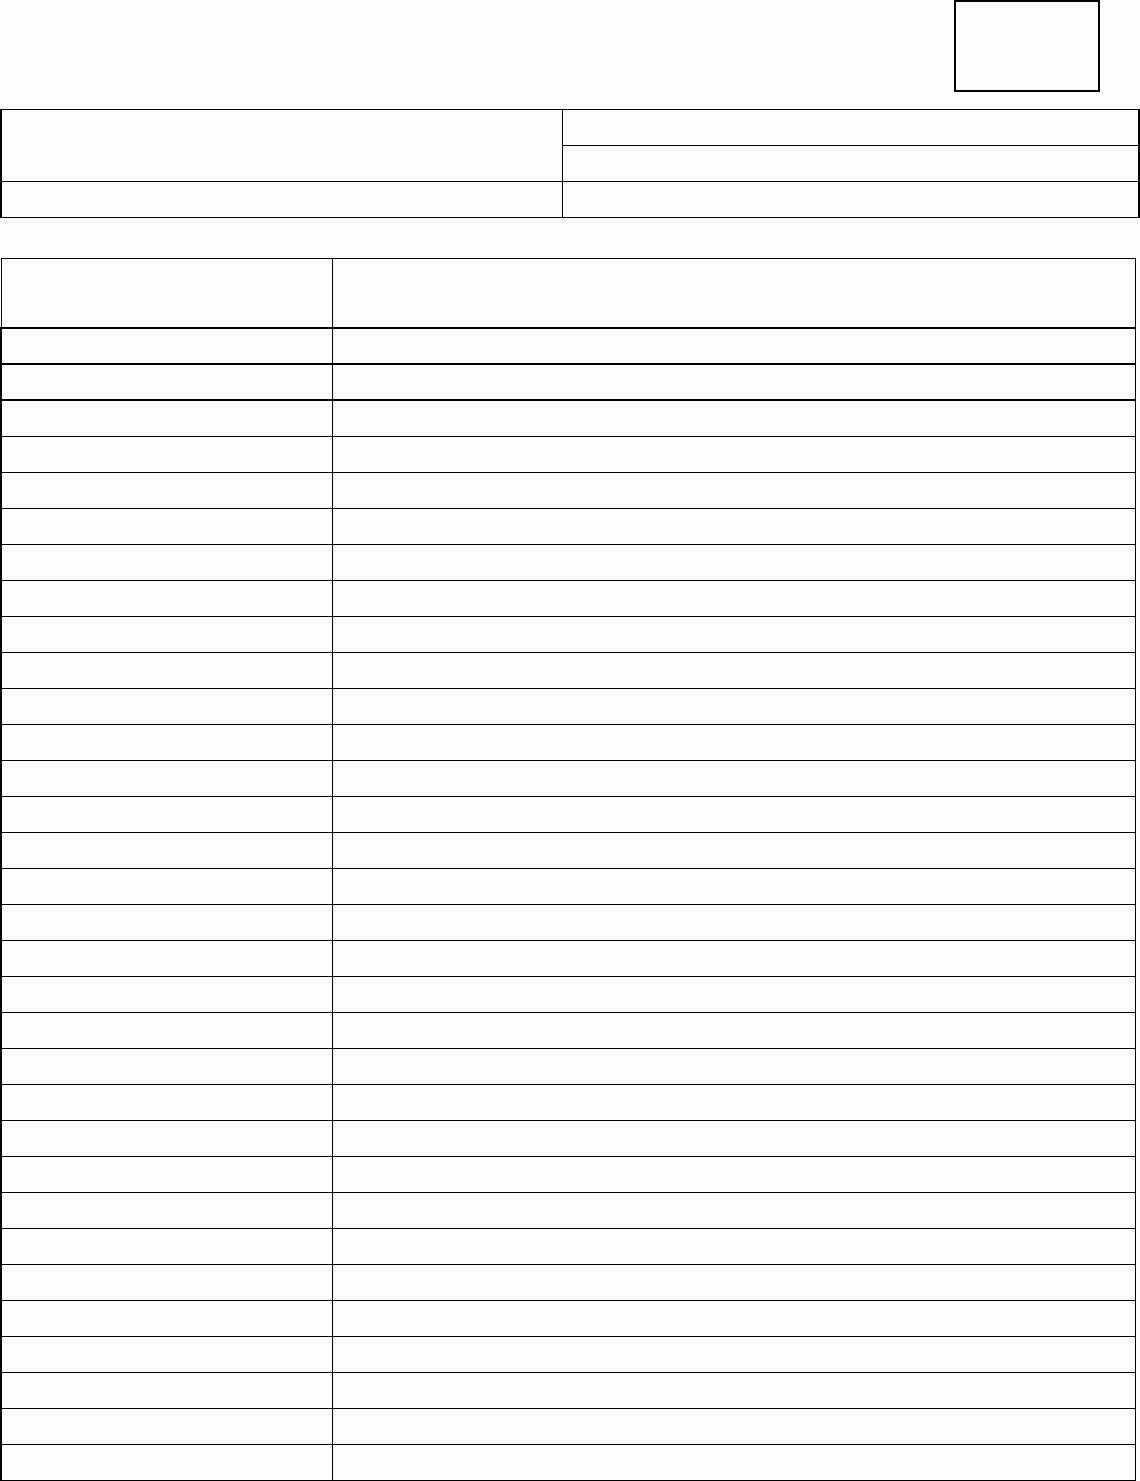 Cornell Note Template Word Inspirational Cornell Notes Word Template In Word and Pdf formats